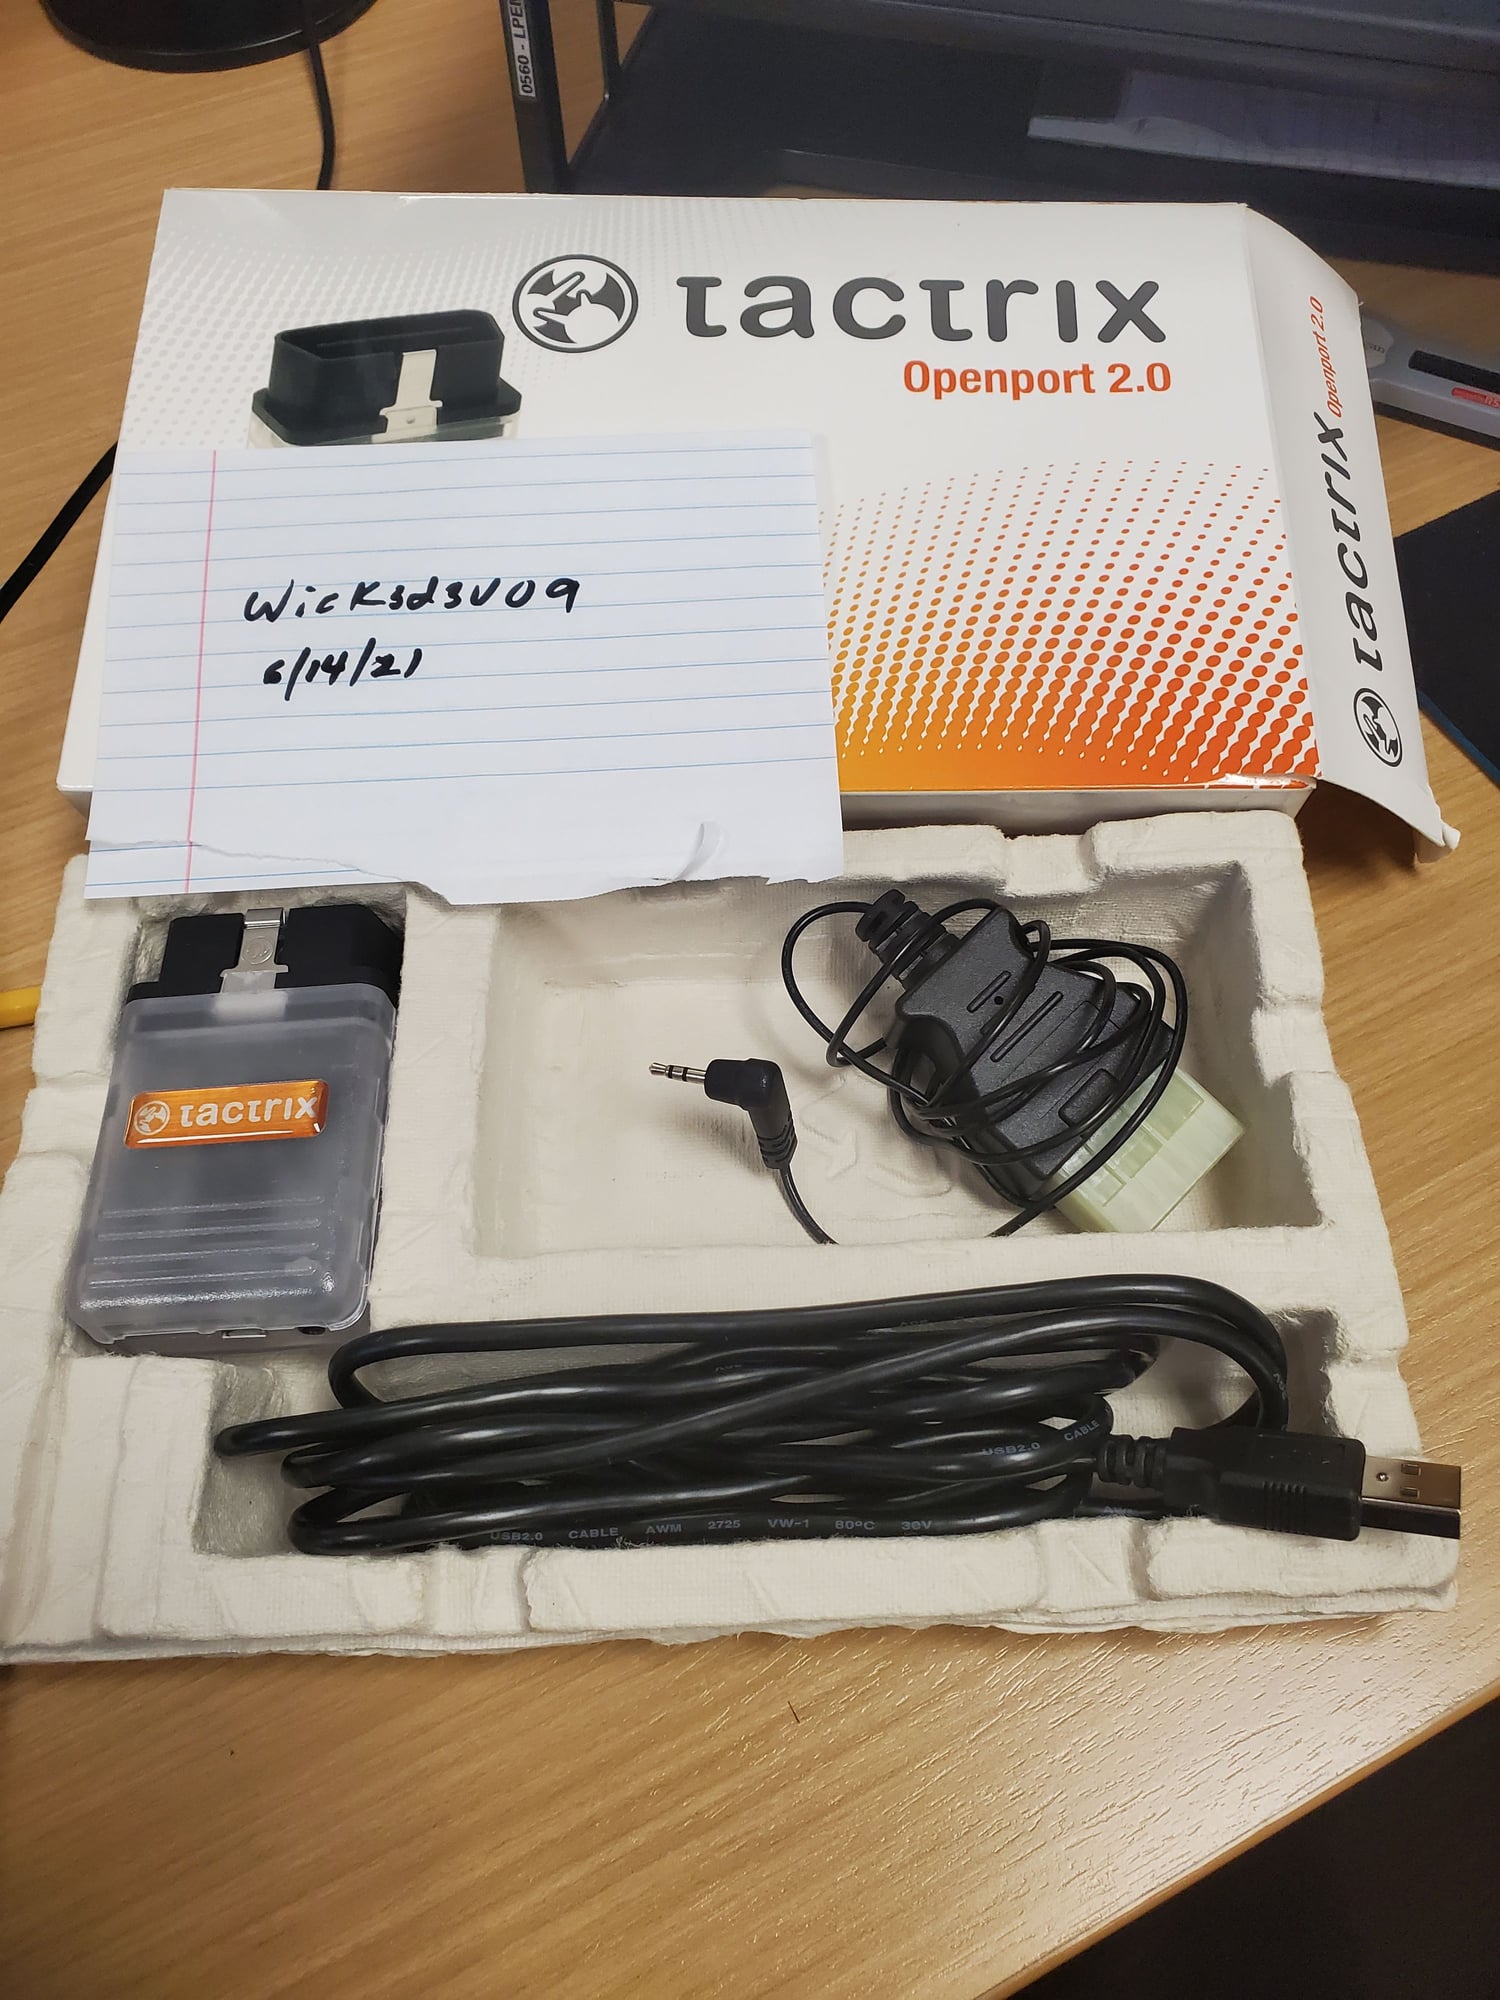 Miscellaneous - FS: Tactrix Openport 2.0 W/Evo Adapter - Used - 0  All Models - Houston, TX 77005, United States